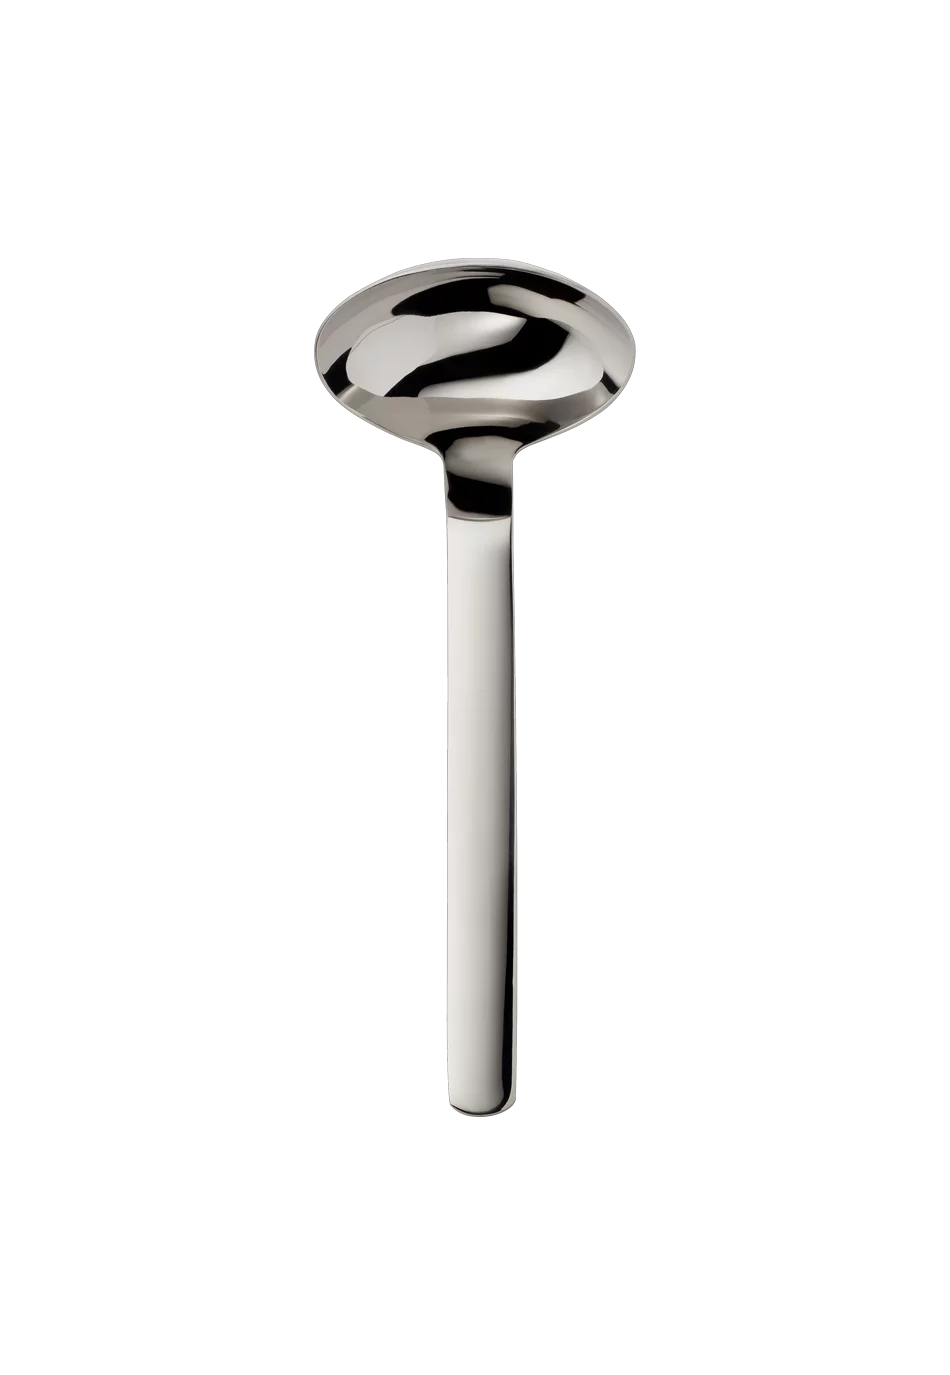 Topos Sauce Ladle (18/8 stainless steel)